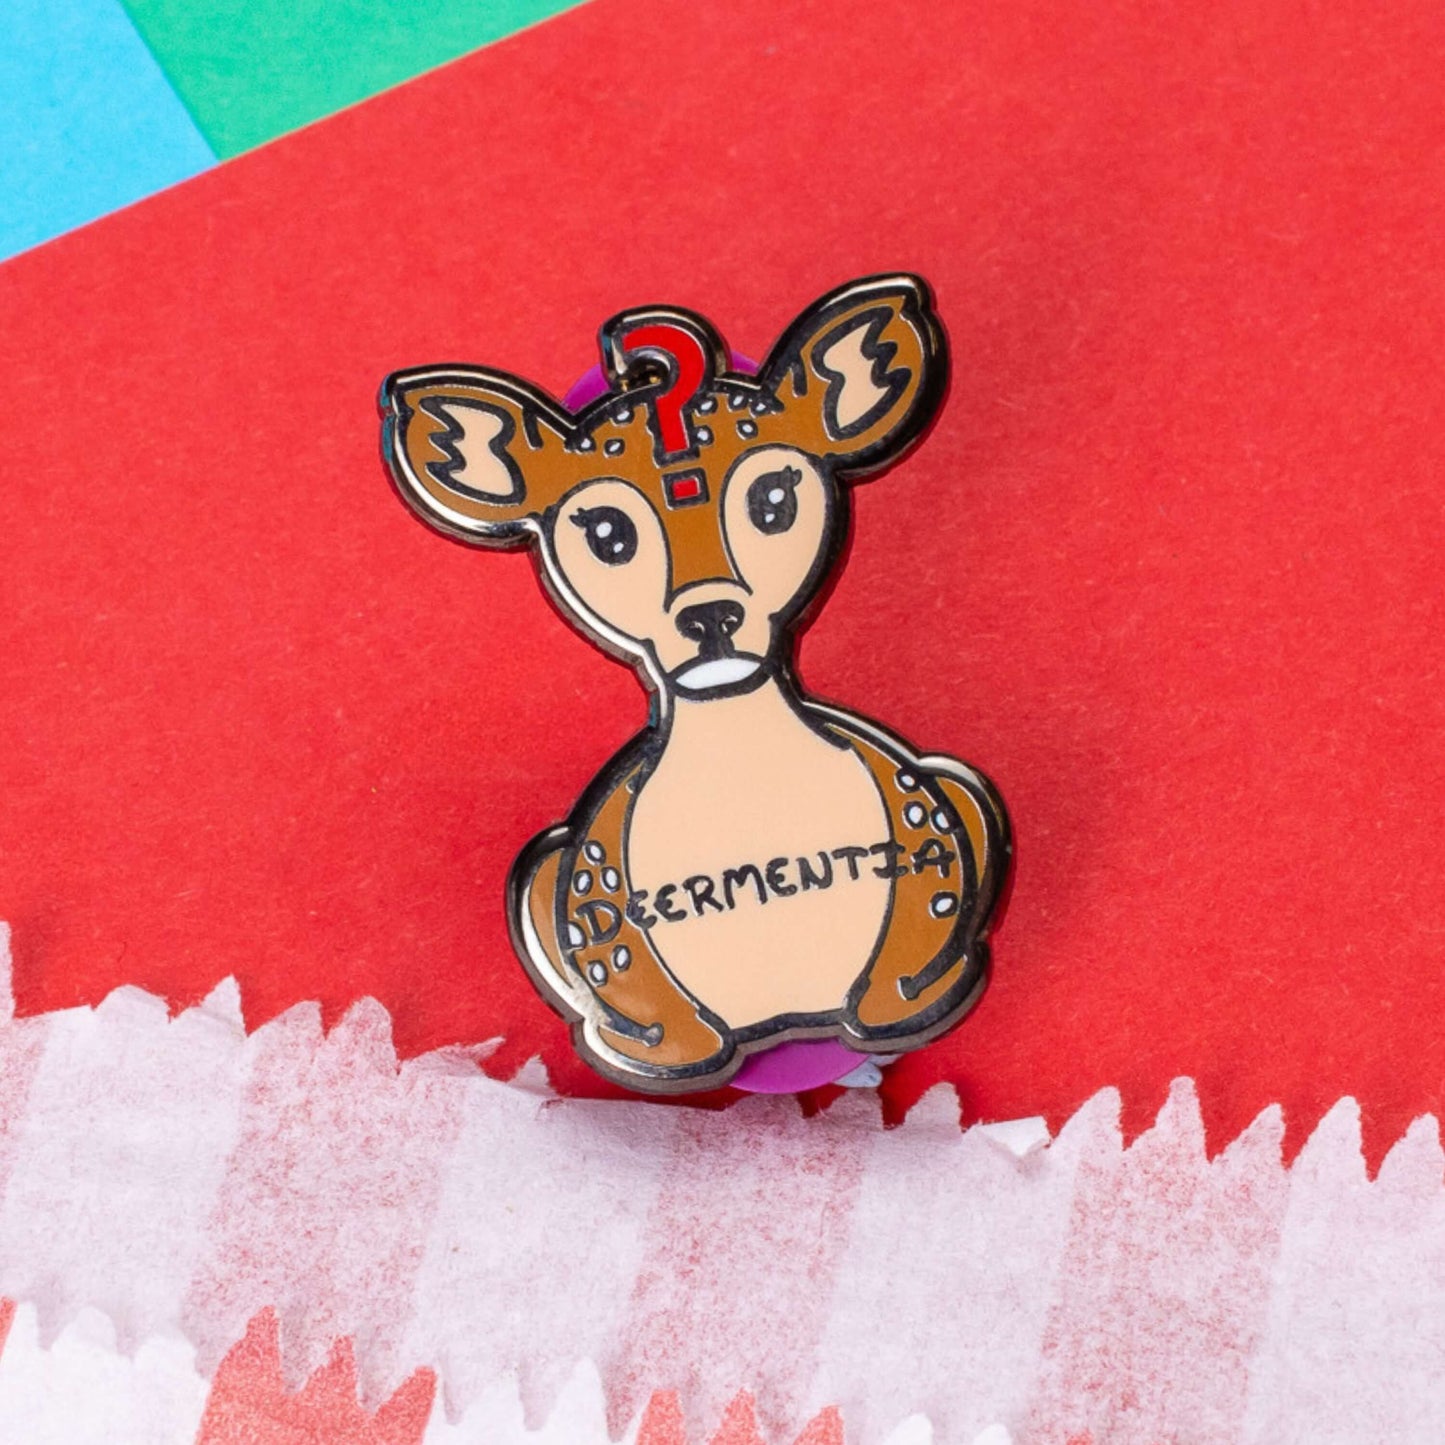 The Deermentia Deer Enamel Pin - Dementia on a red, blue and green card background. A brown female deer laying down with a vacant expression and red question mark above its head with 'deermentia' written across its middle. The hand drawn design is raising awareness for dementia.